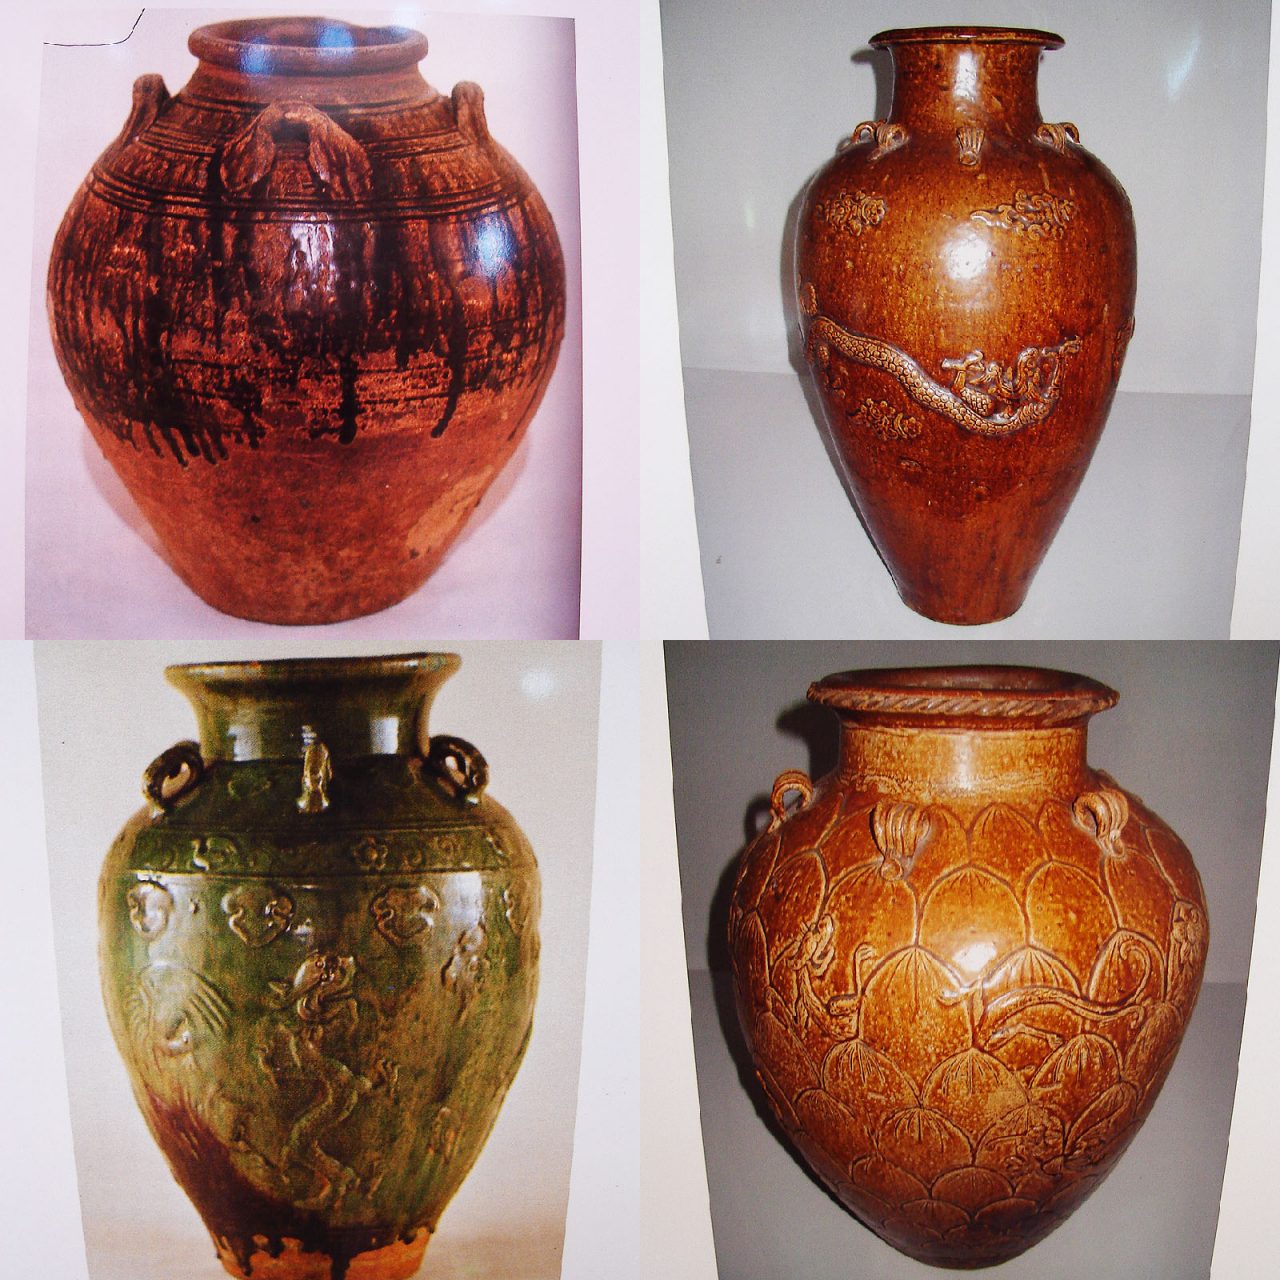 Antique Tapai jars from different districts. From top to bottom, left to right: kologiau from Ranau, sampa from Keningau, rangkang from Kota Belud, sisikan from Ranau